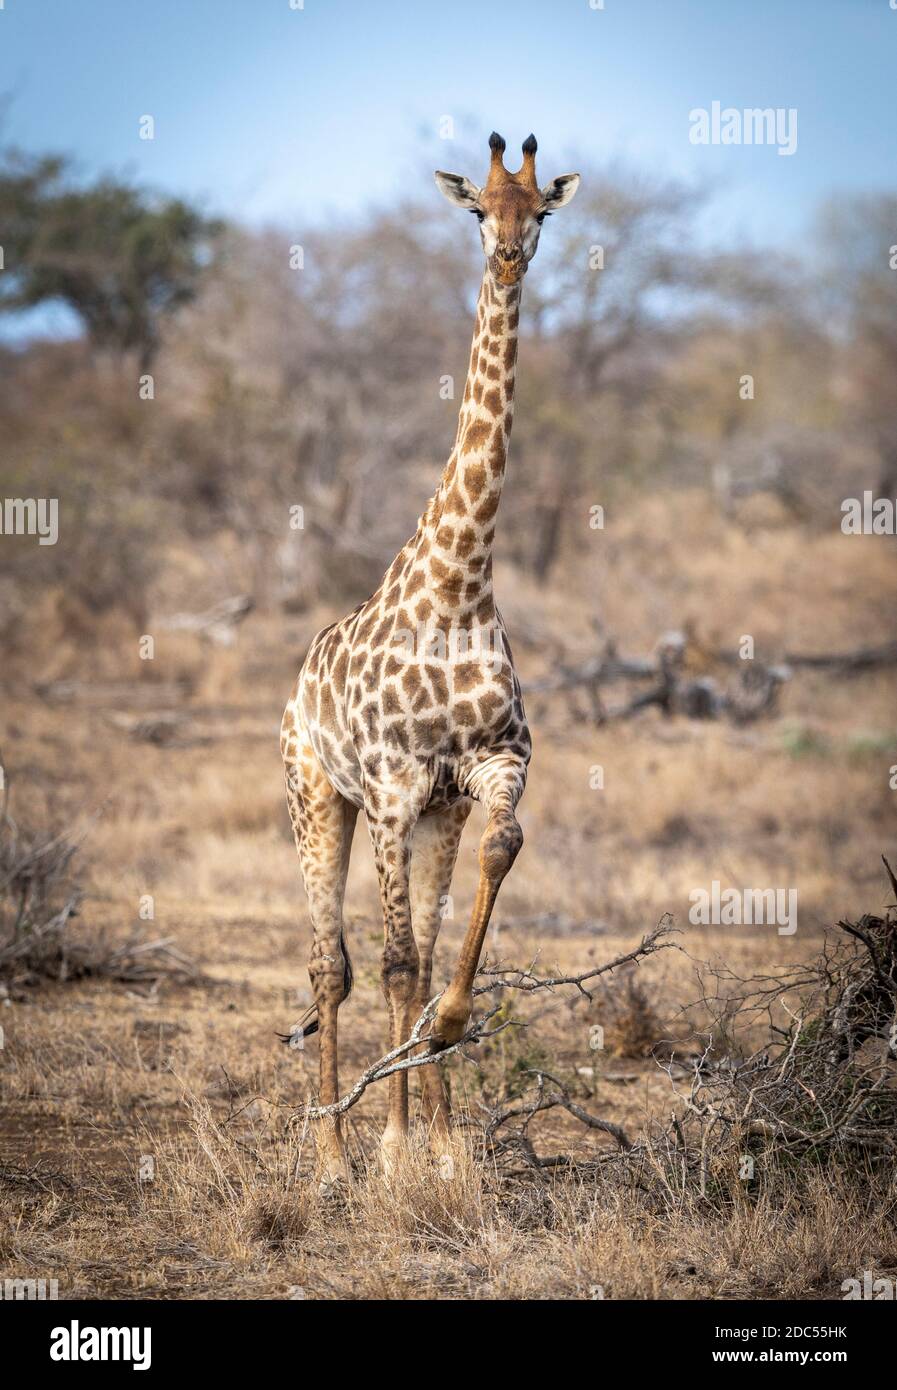 Adult female giraffe standing in dry winter bush with one leg raised in Kruger Park in South Africa Stock Photo